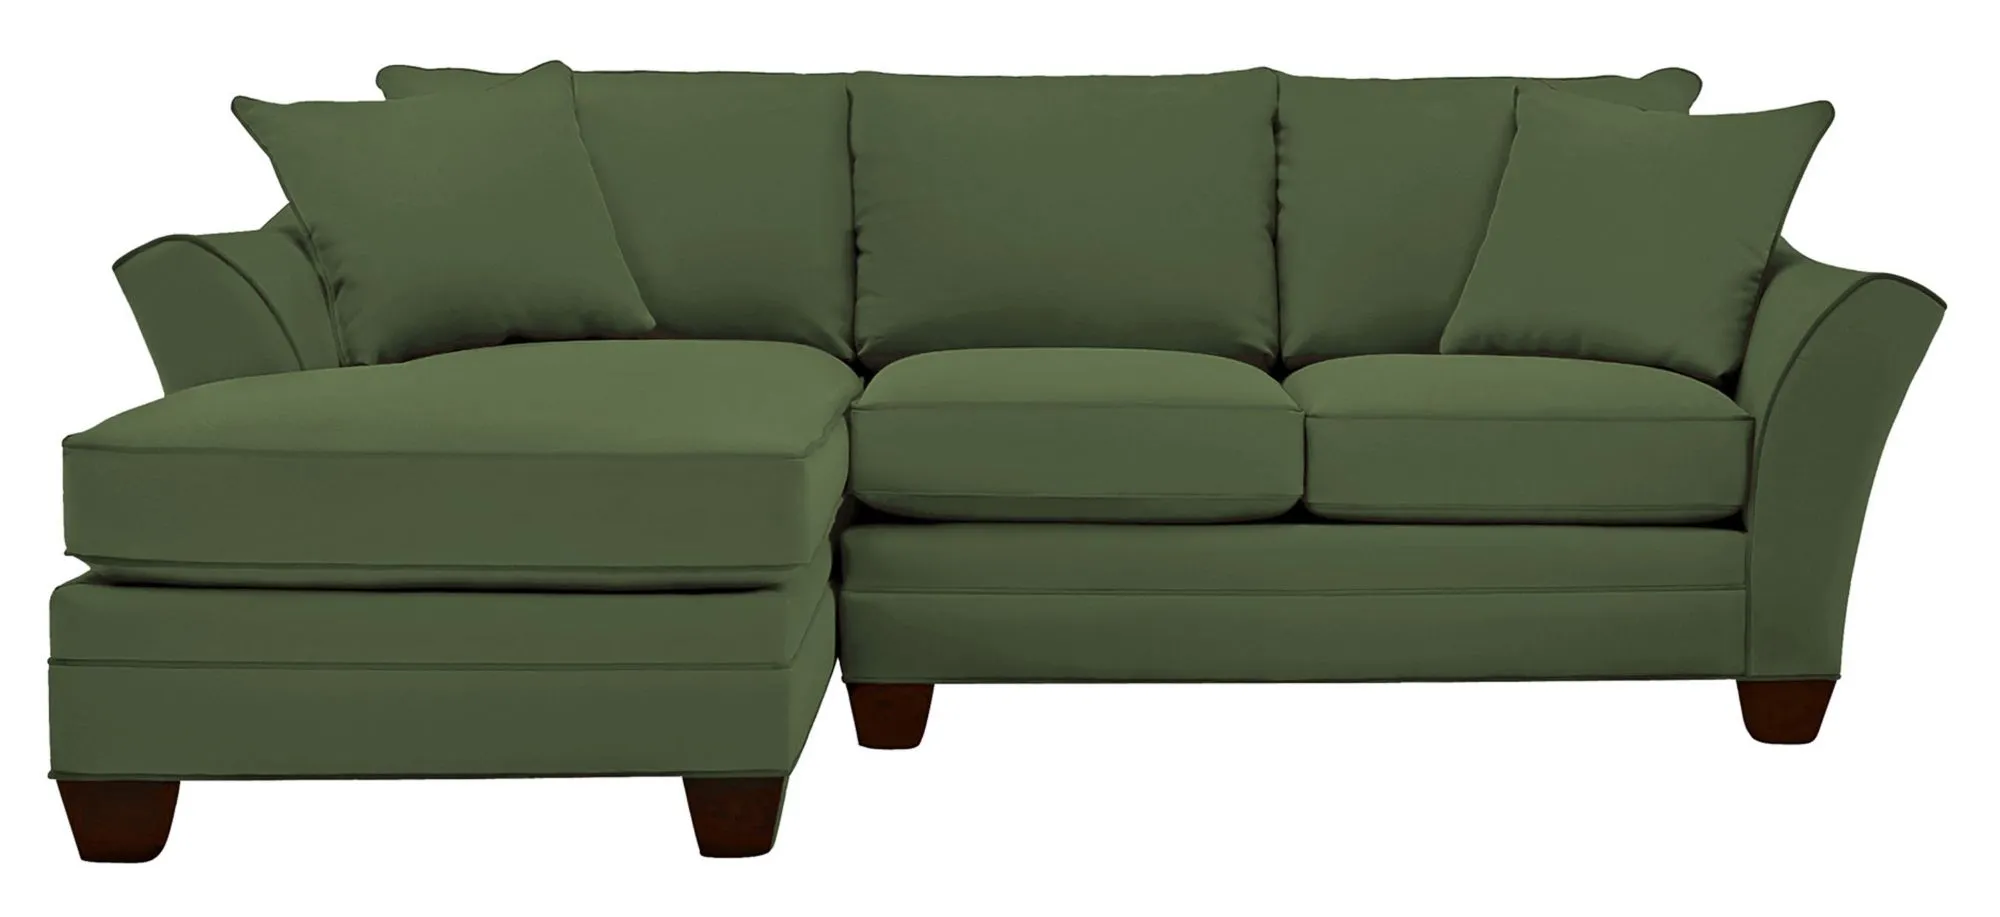 Foresthill 2-pc. Left Hand Chaise Sectional Sofa in Suede So Soft Pine by H.M. Richards